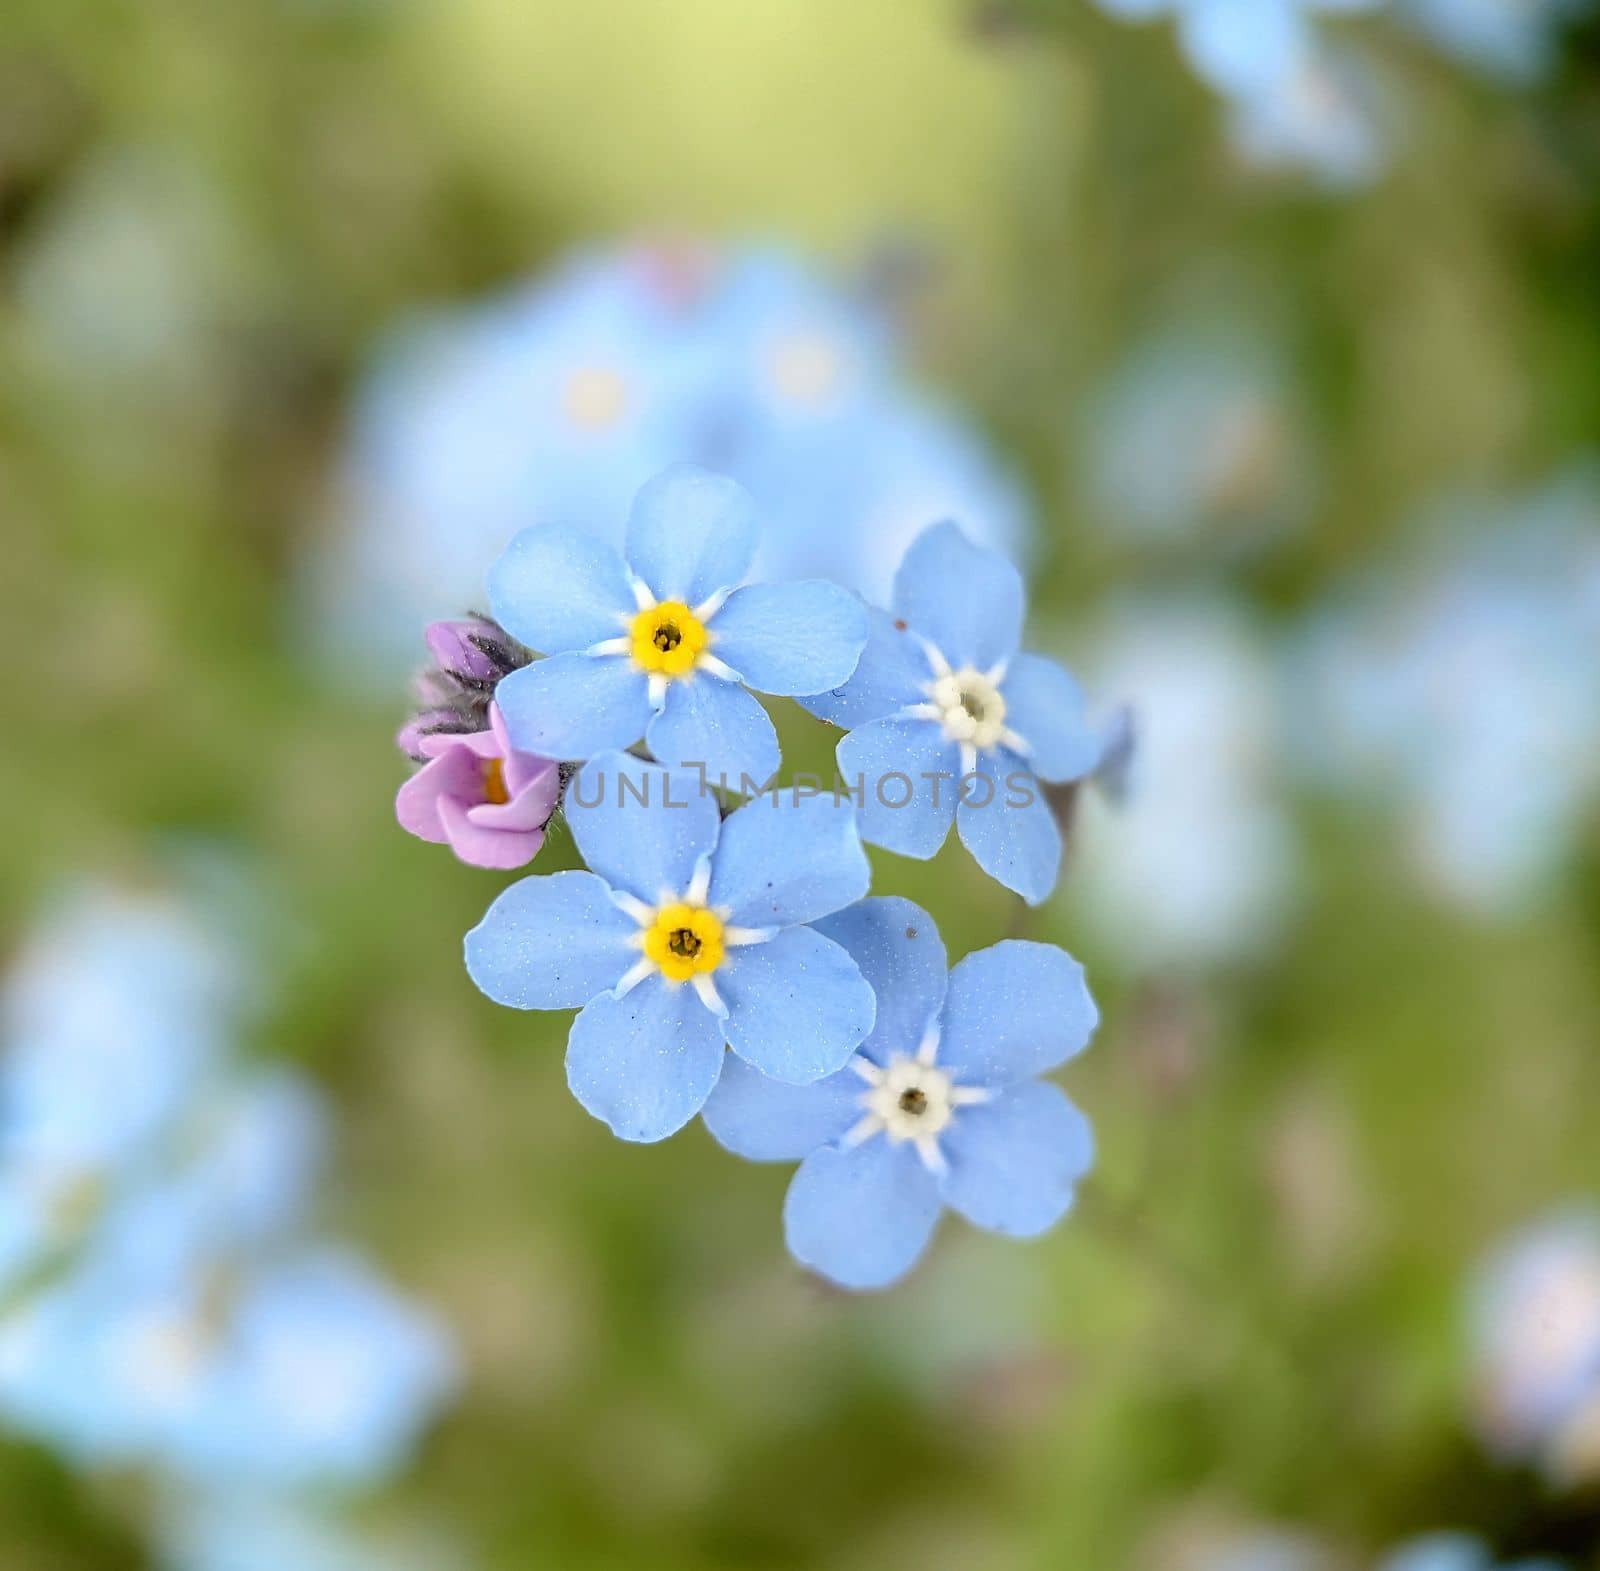 Blooming forget-me-not flowers of pale blue color by Mastak80